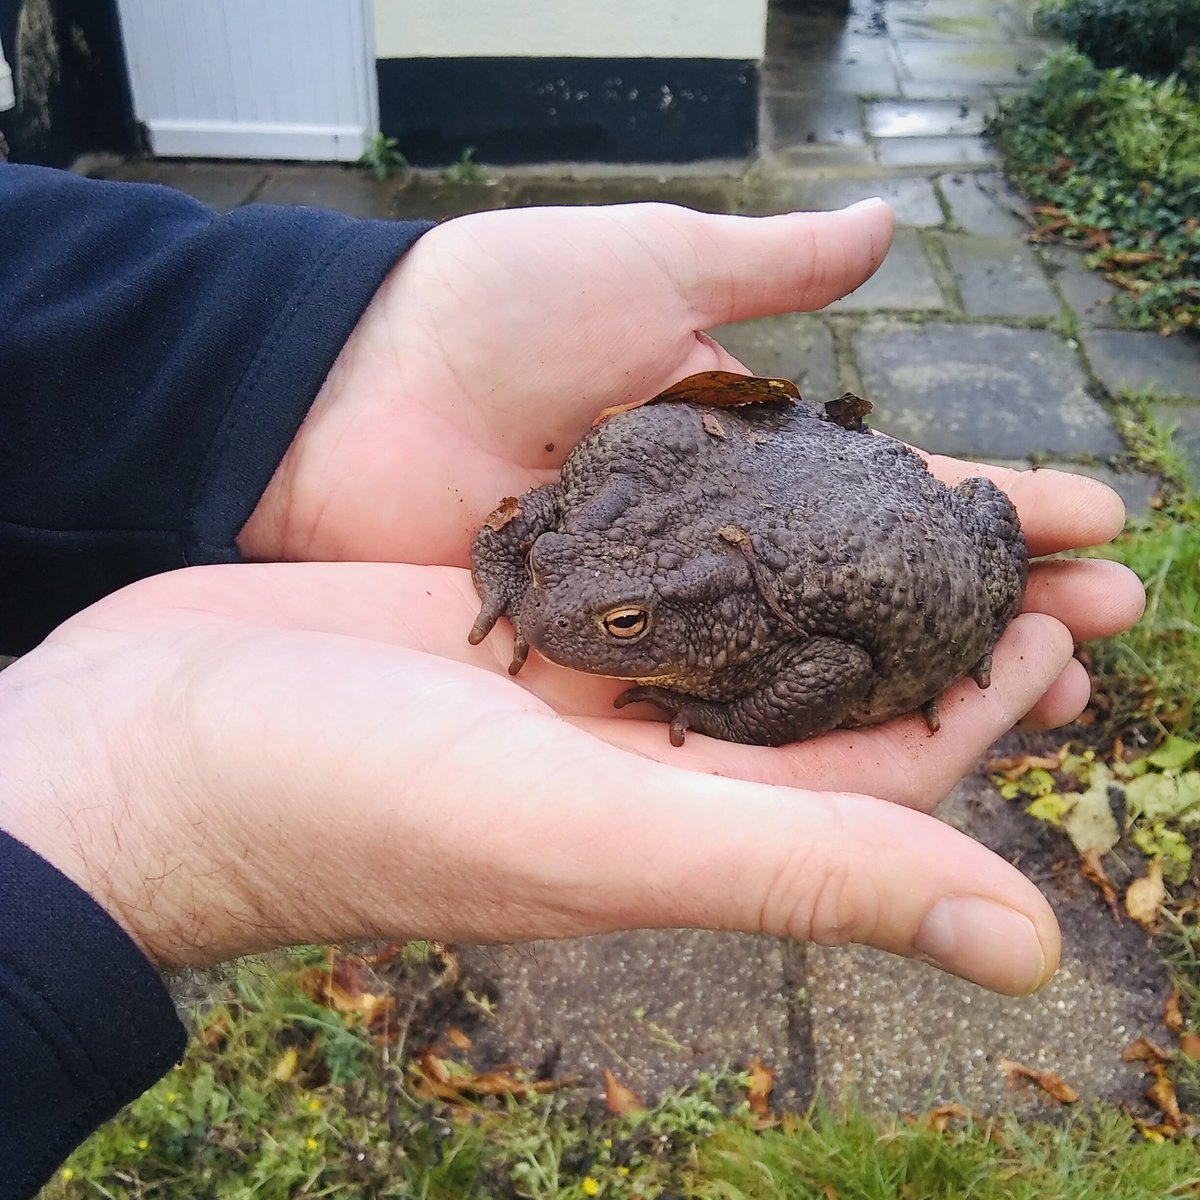 Ultimate #workperk. @EssexWT_Emma and @macbradanbones found this beautiful golden-eyed, fat-bellied #toad at the @EssexWildlife HQ earlier in the week and shared with me. Once common, #toads have suffered catastrophic declines. #EssexToads #LoveEssex 🐸❤️